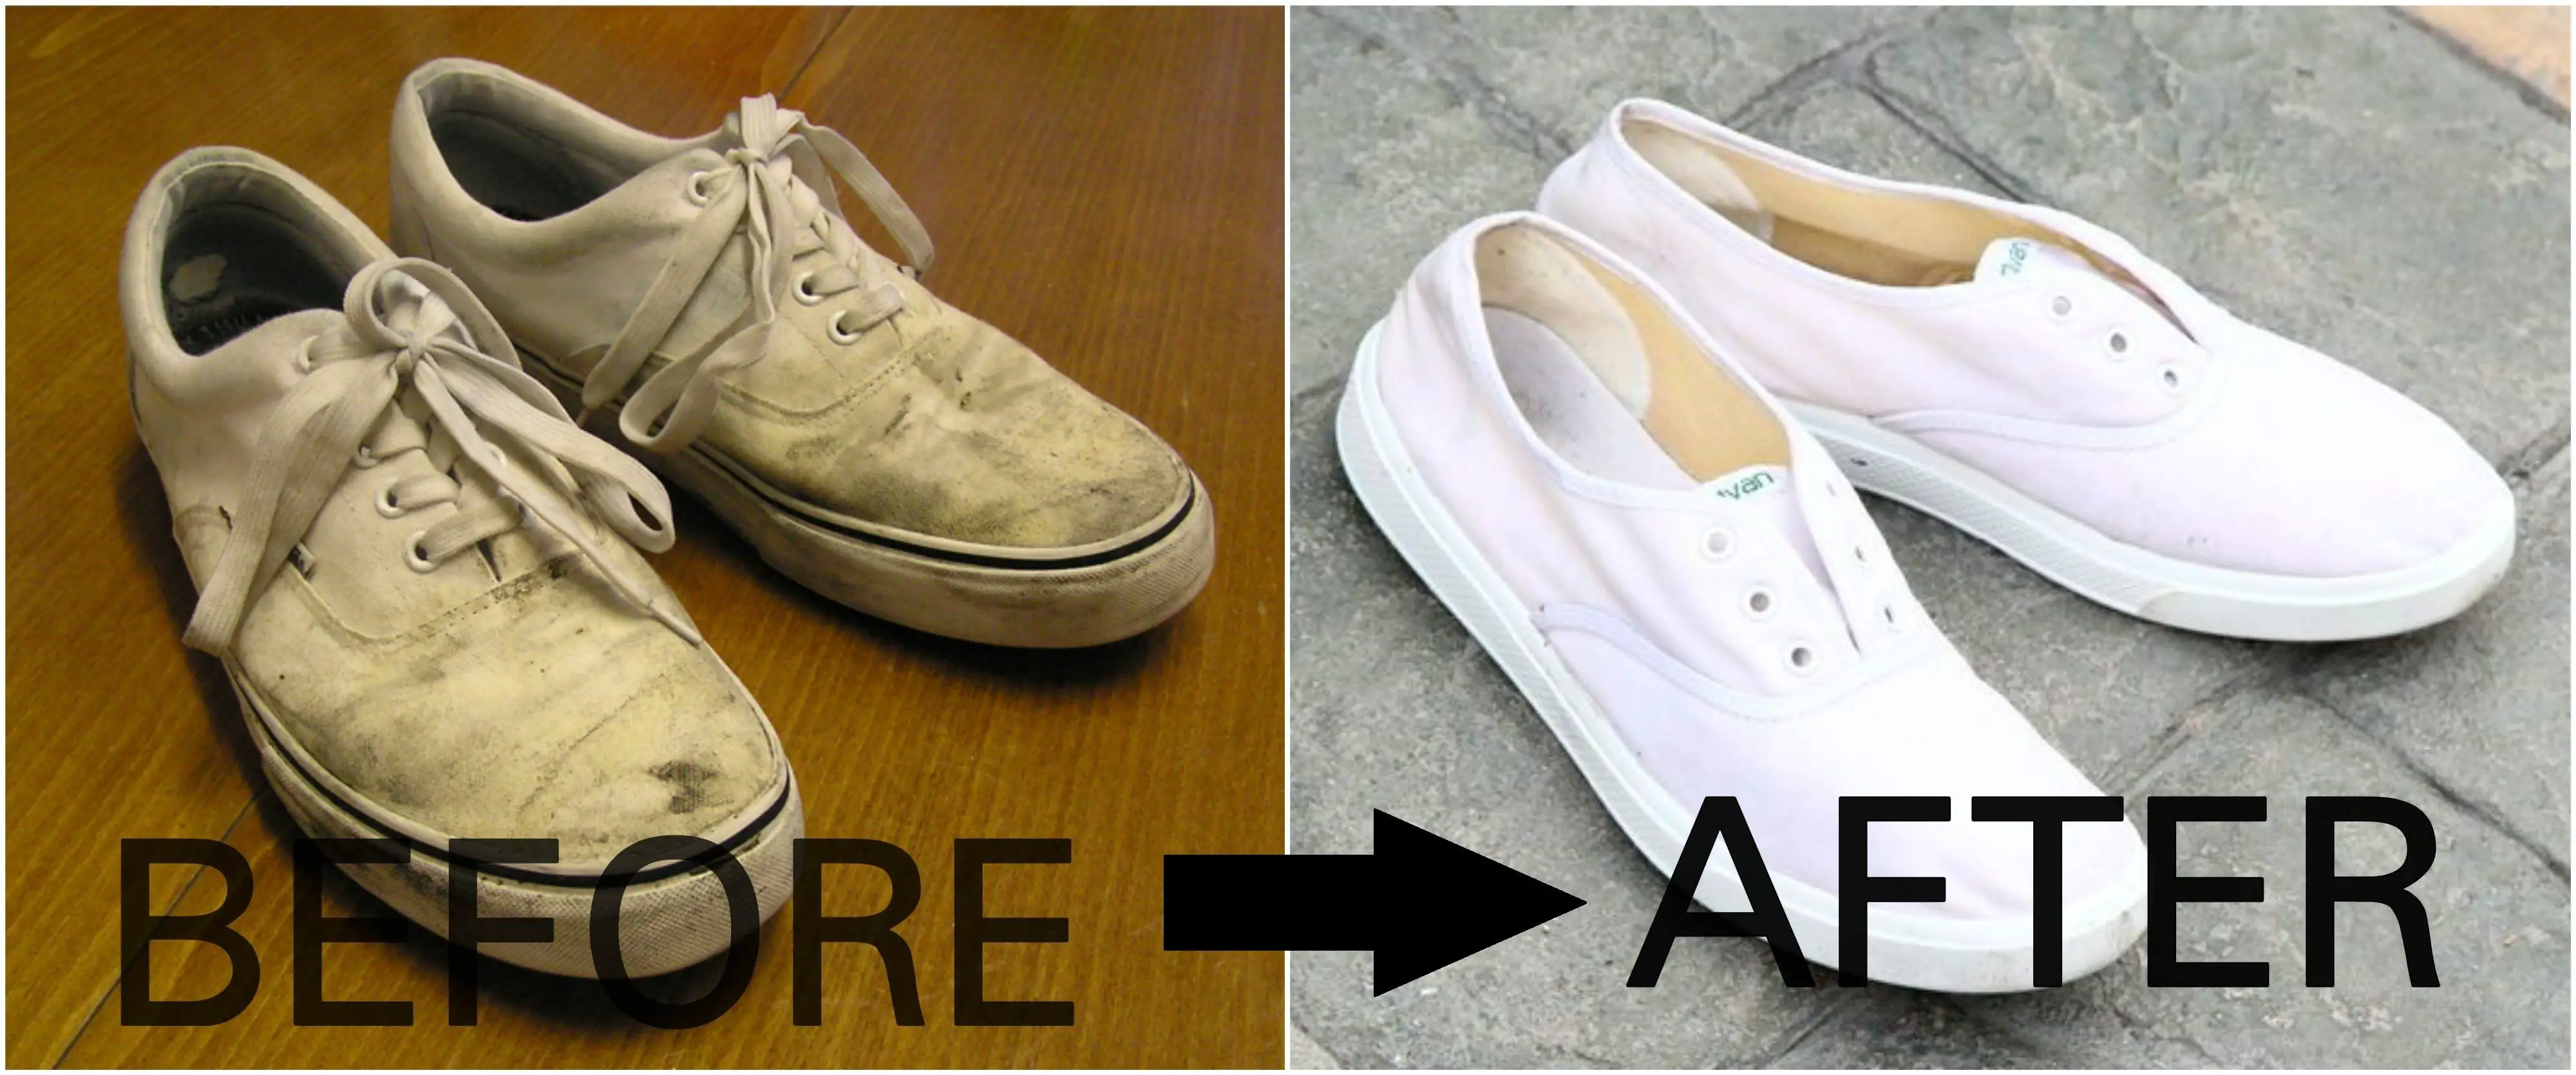 How to Clean White Vans: 11 Useful Tips to Maintain Your Shoes!